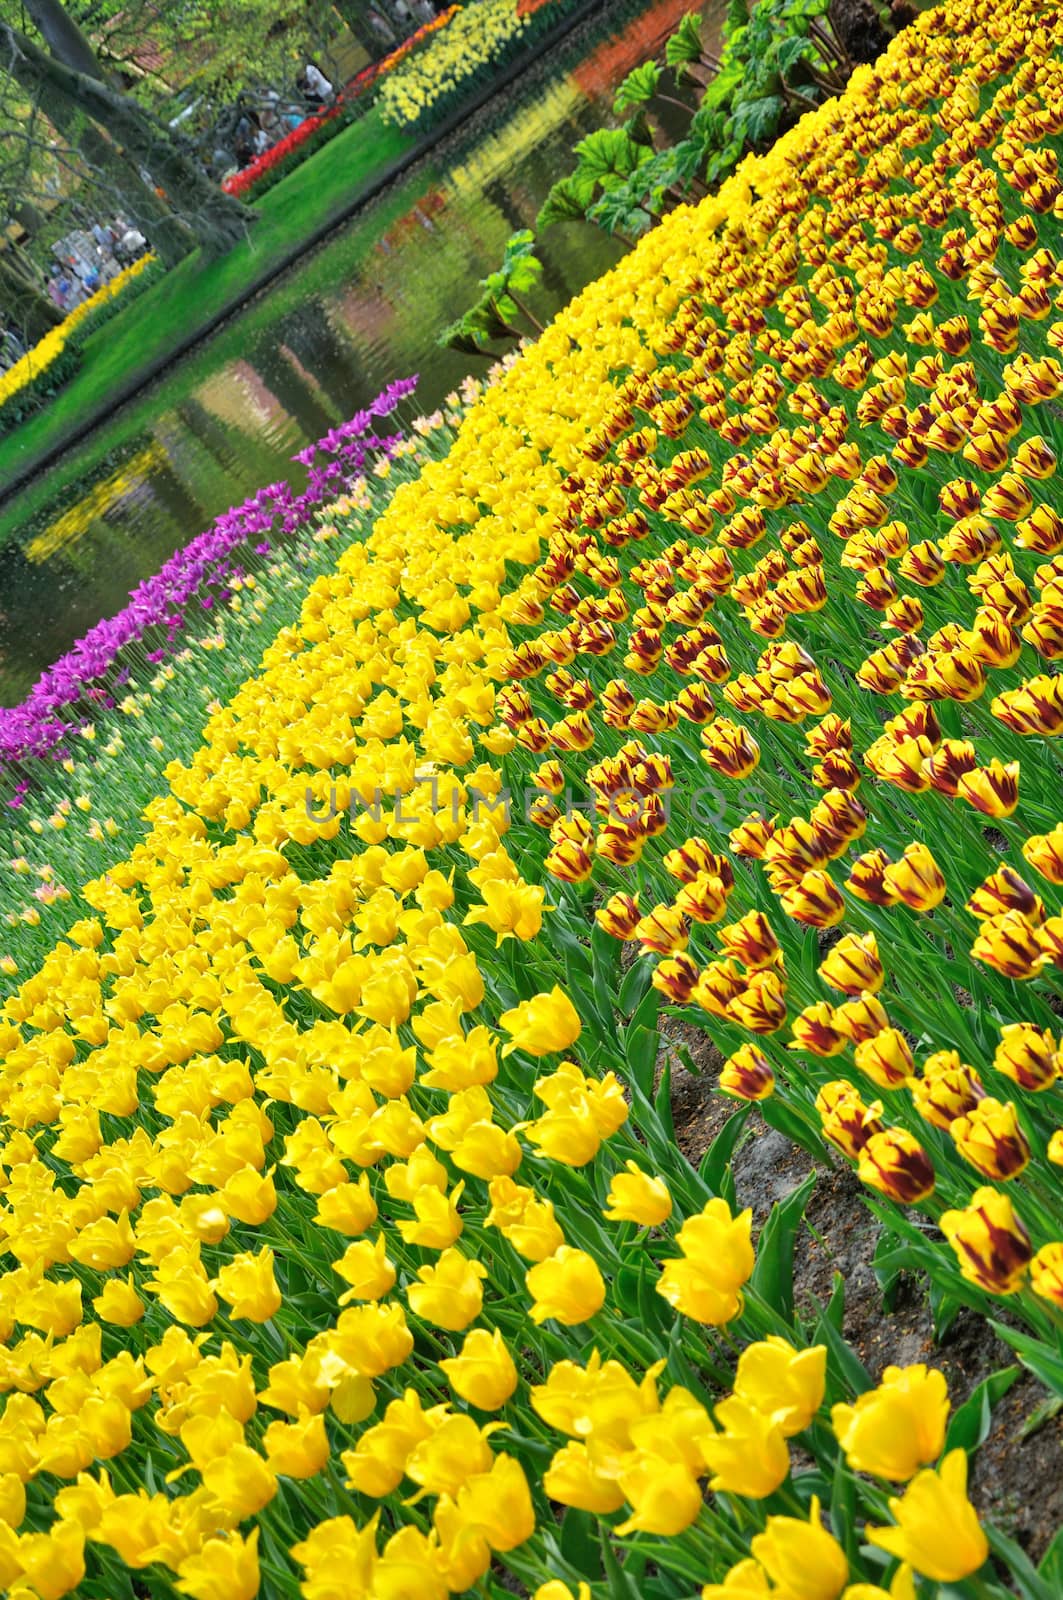 Yellow and purple tulips in Keukenhof park in Holland by Eagle2308